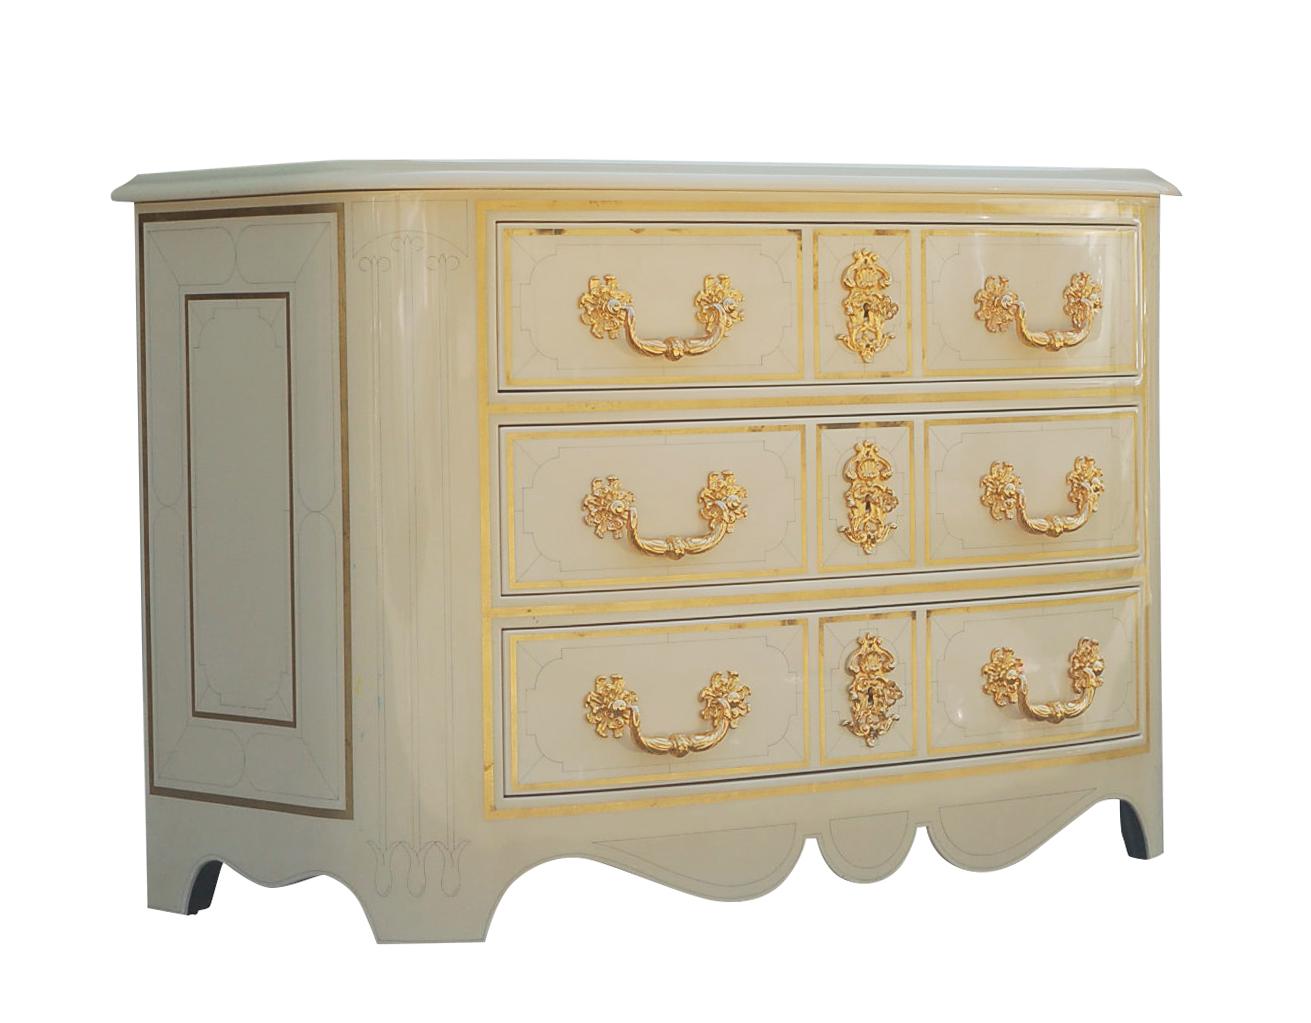 A fine and stunning high quality set of commodes, made in Italy, circa 1970s. The chests feature, ivory white gloss lacquer, gold leaf inlay, gold-plated hardware, and velvet lined drawers.